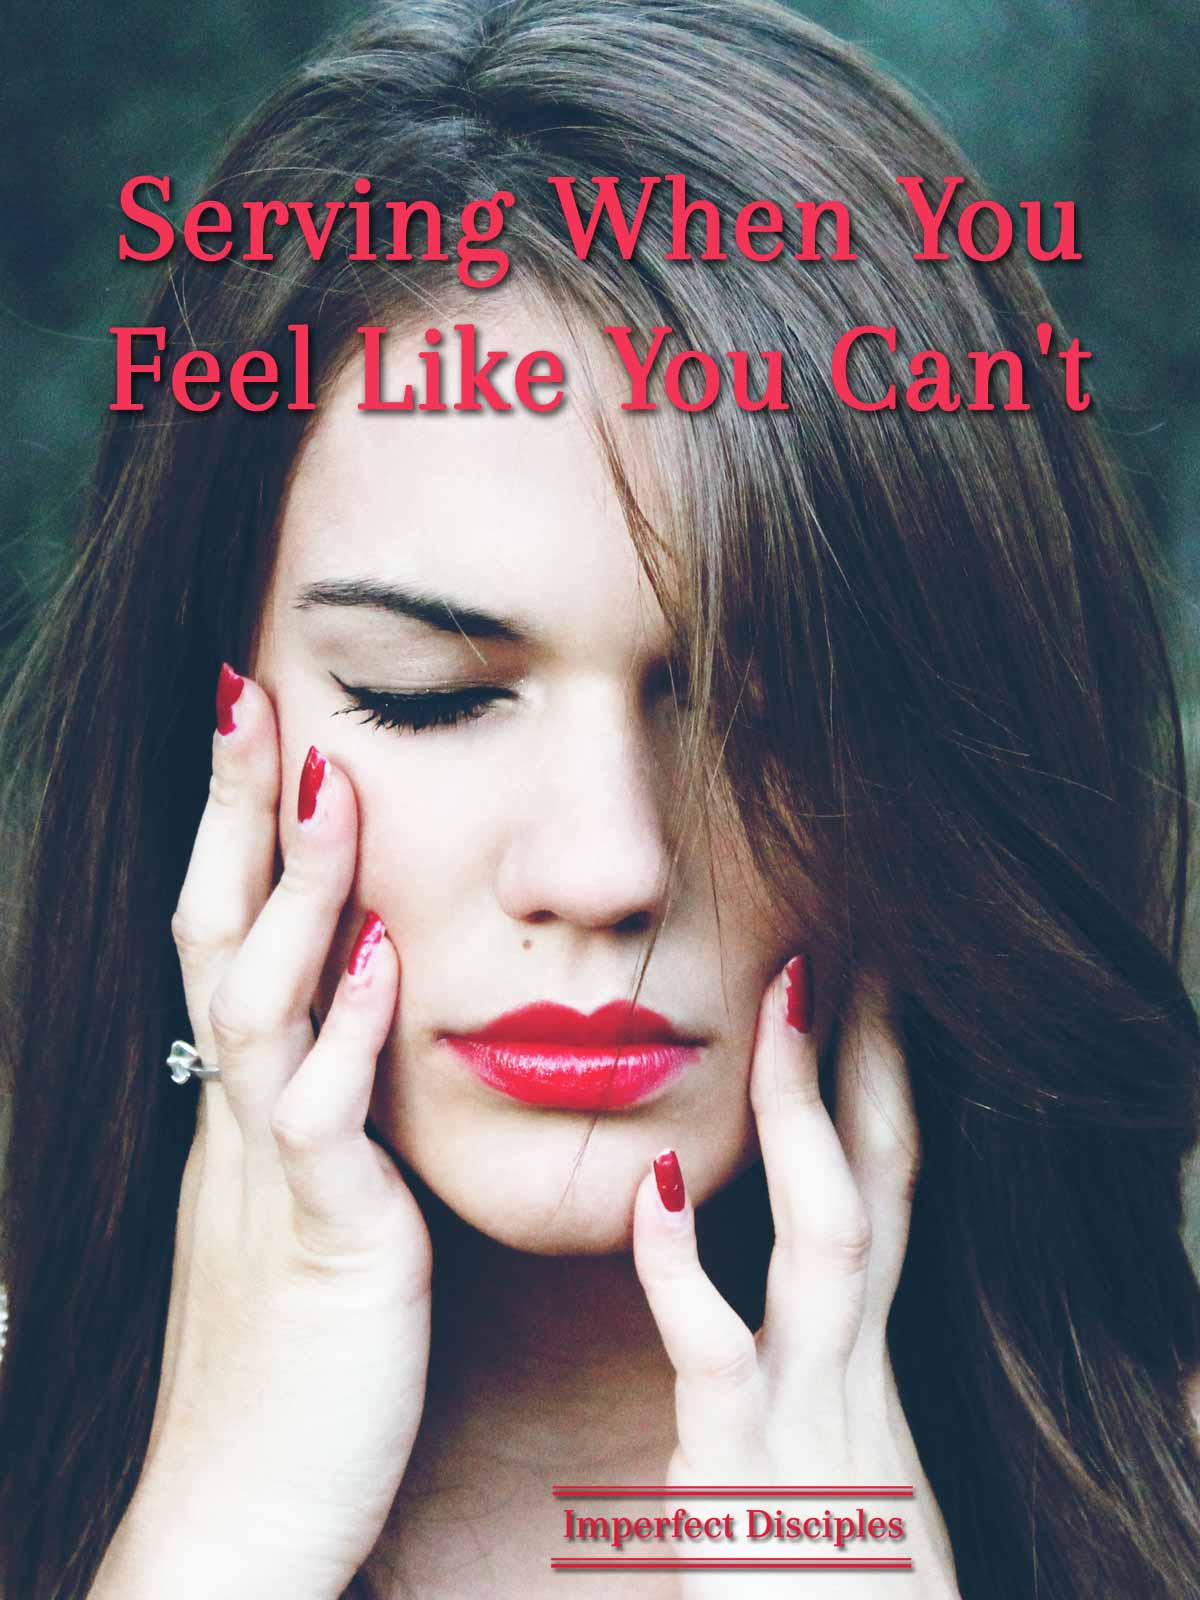 Serving when you feel like you can't